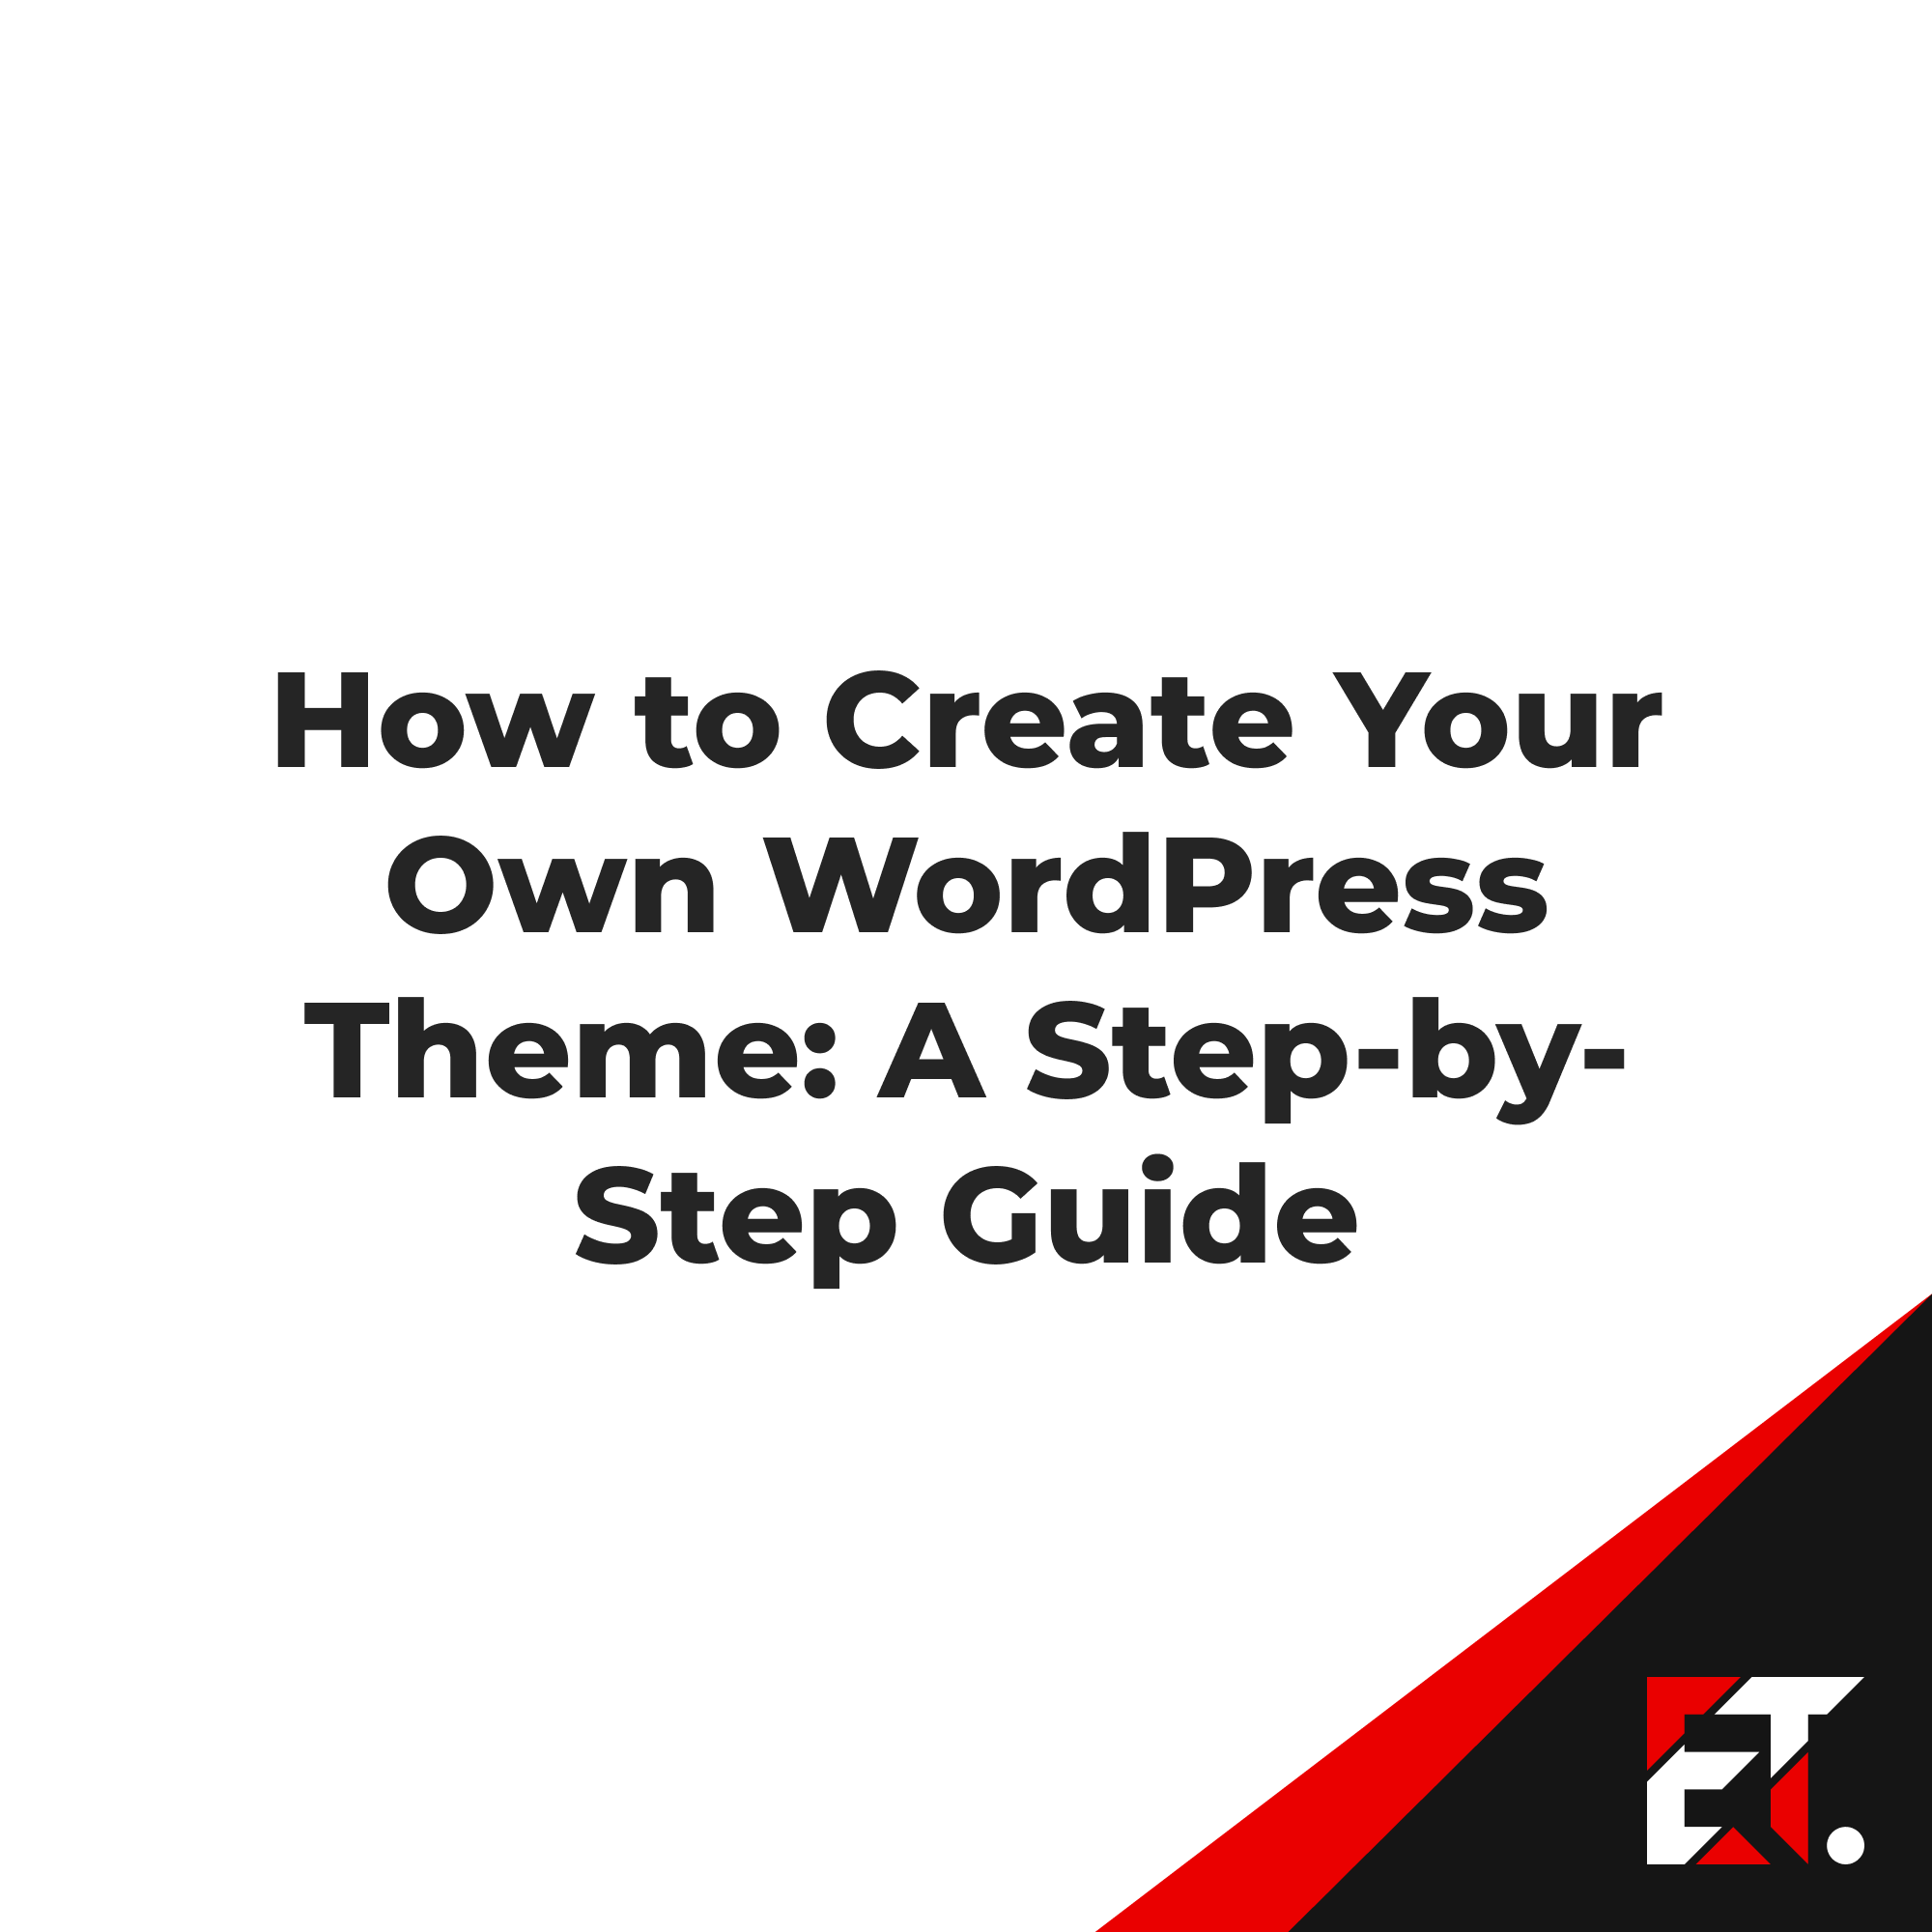 How to Create Your Own WordPress Theme: A Step-by-Step Guide